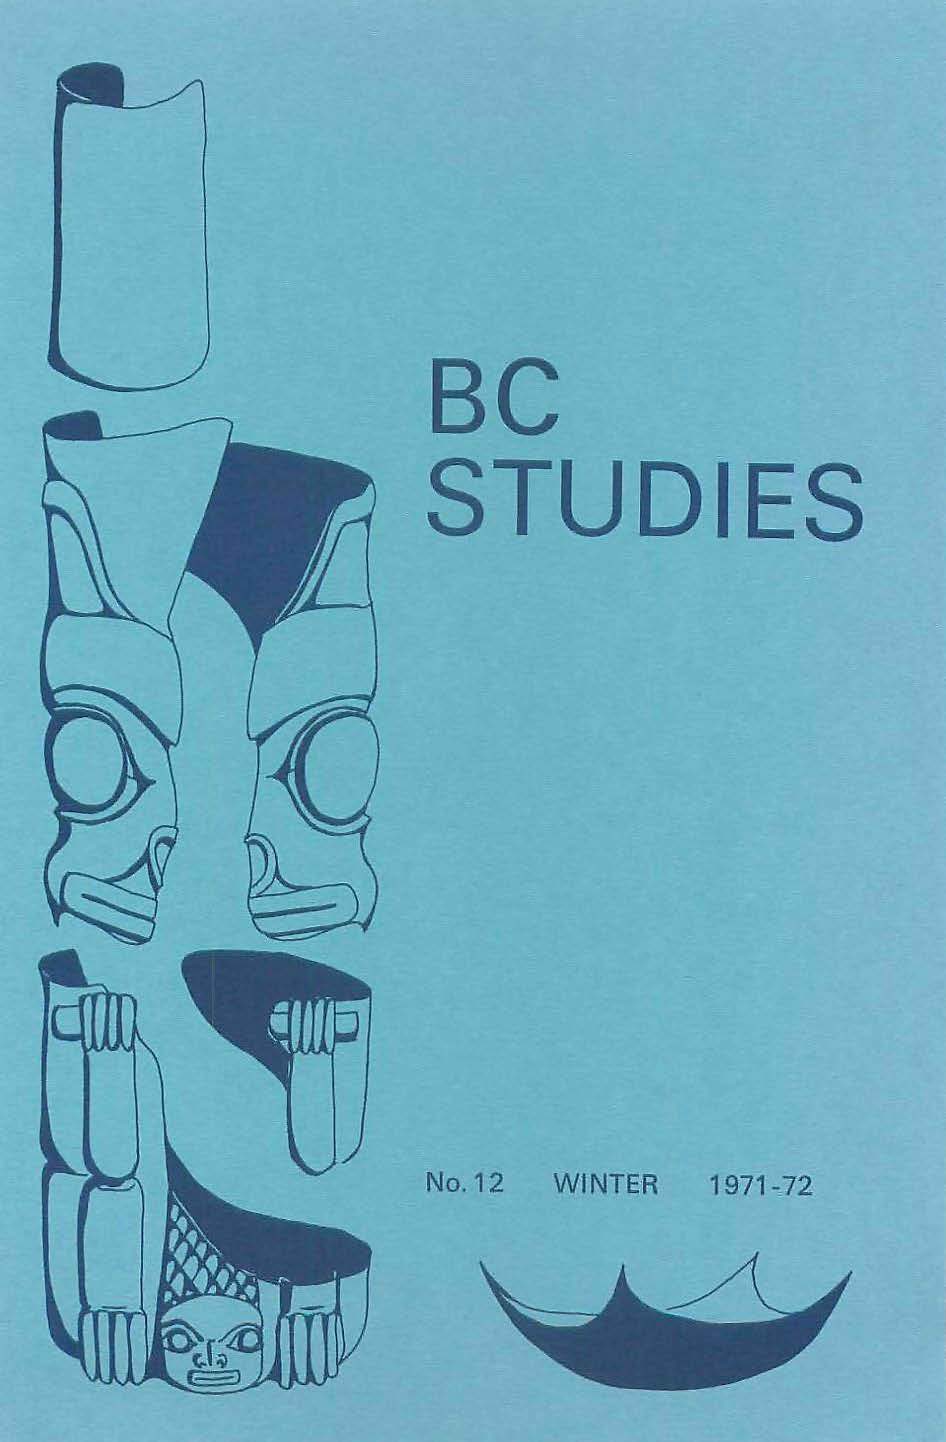 Product Image of: BC Studies no. 12 Winter 1971-1972